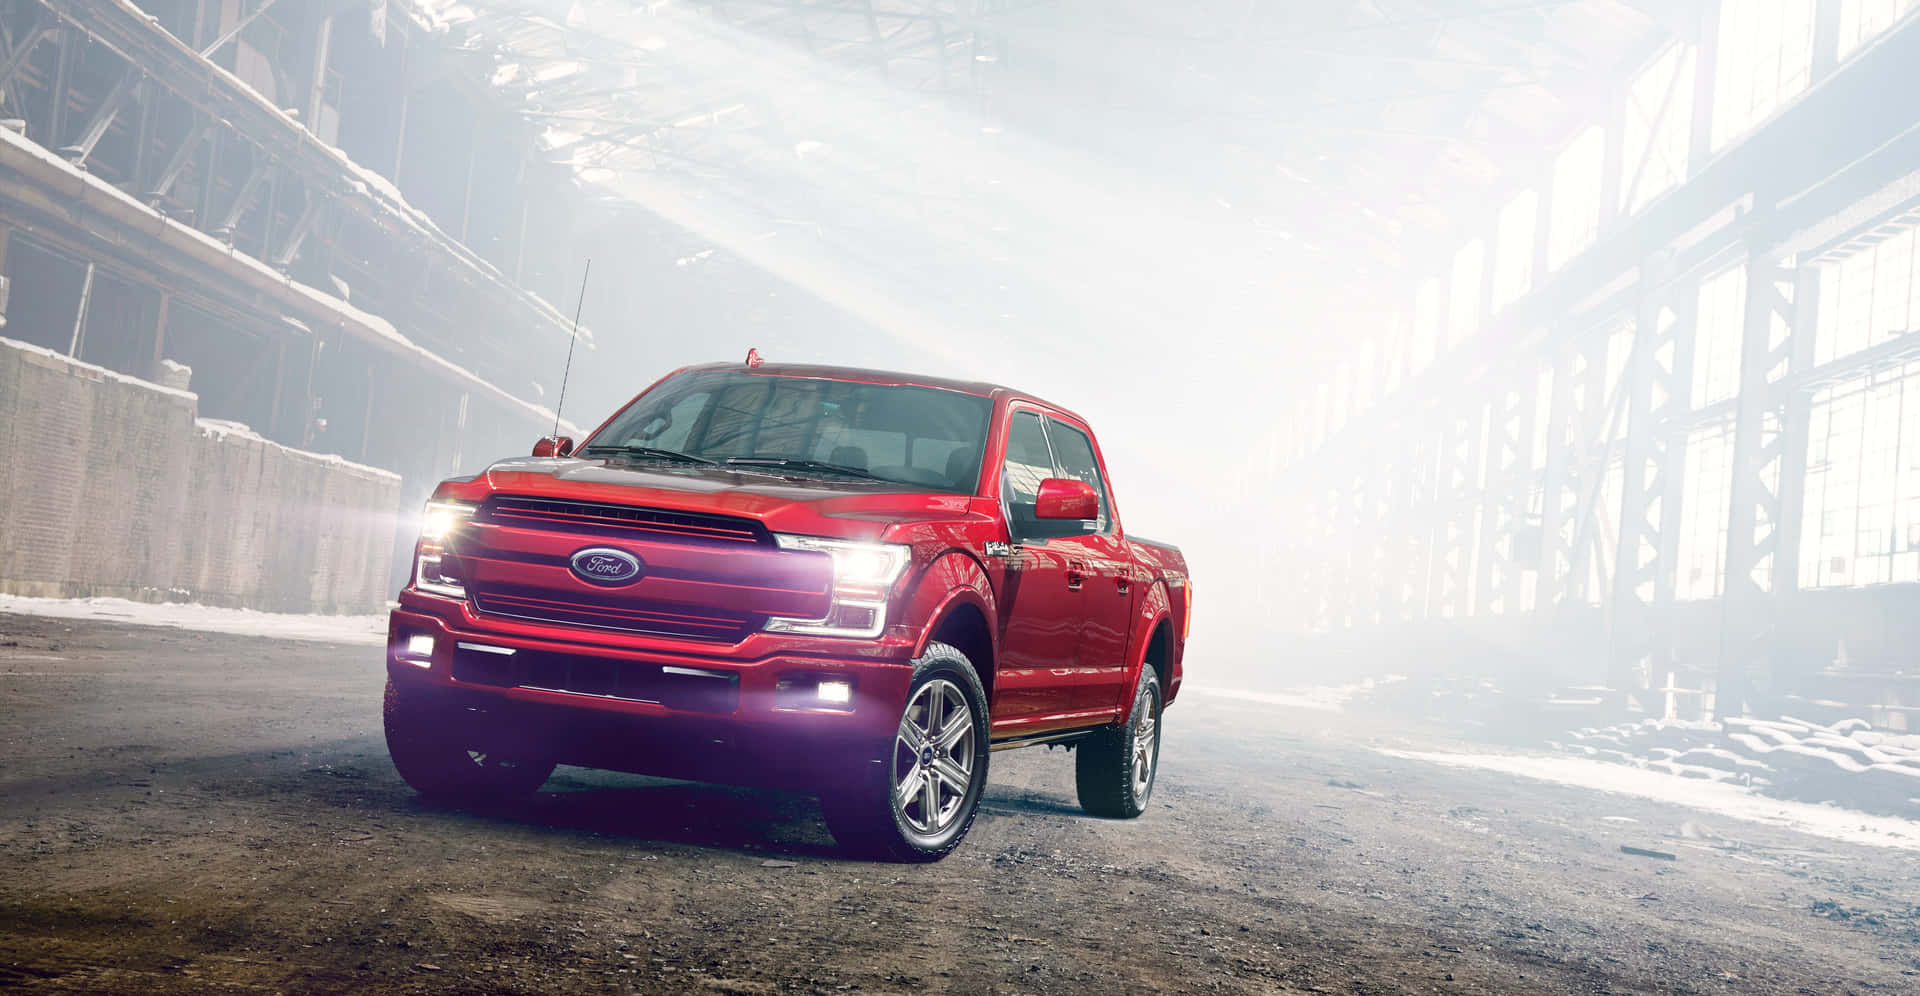 The Red Ford F-150 Is Driving Through An Industrial Building